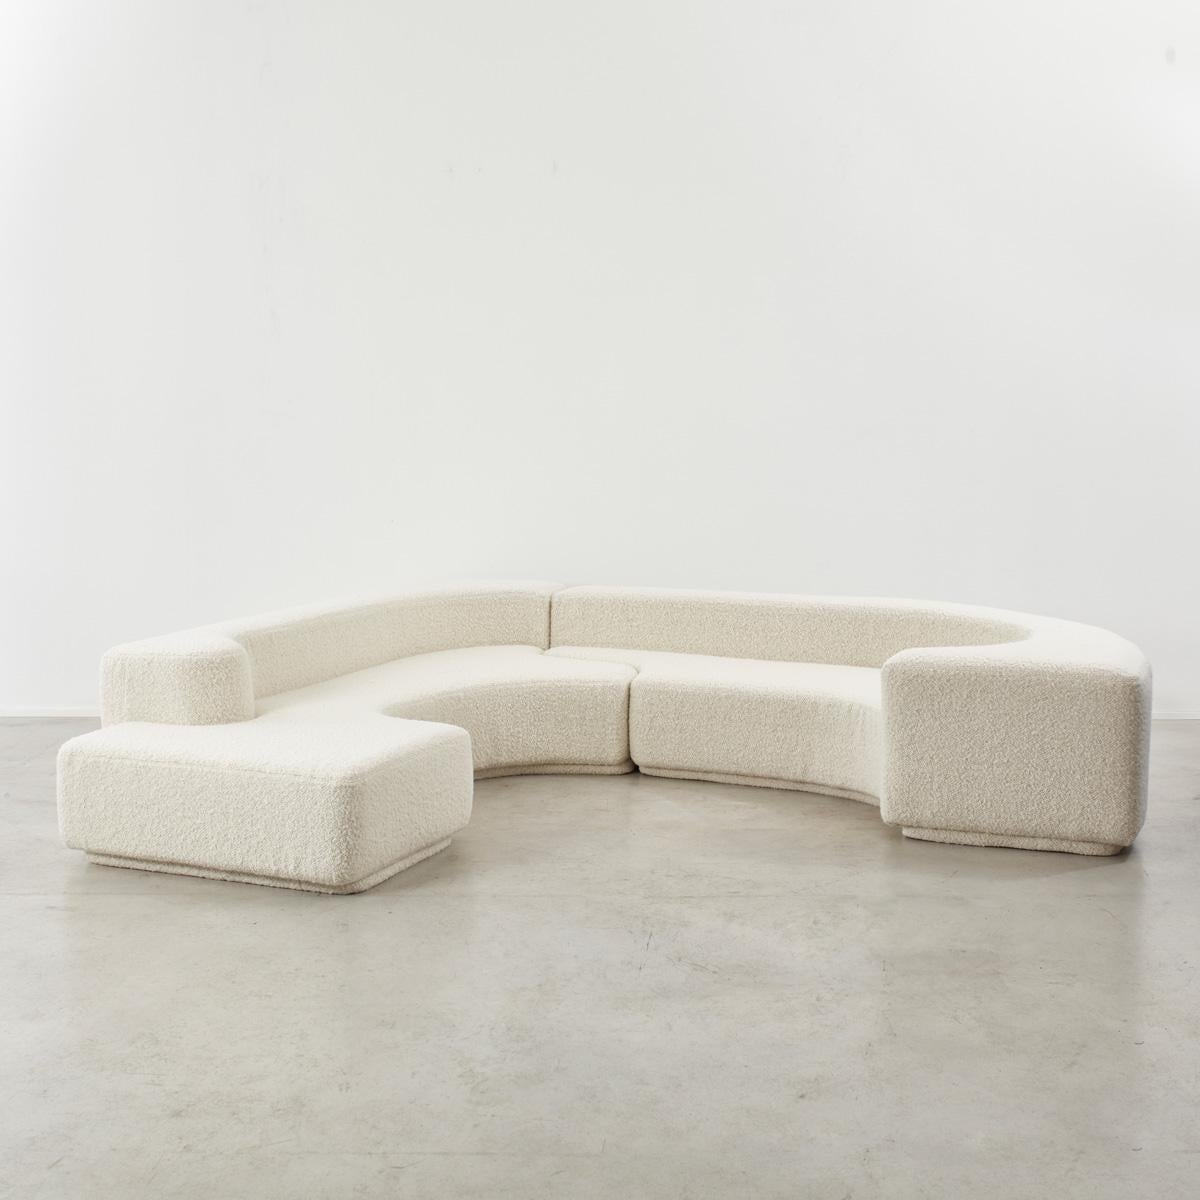 The Lara sofa, 1958 was designed by Roberto Pamio, Renato Toso and Noti Massari for Stilwood. Pamio and Toso were close collaborators. Joined by Massari for the sofa project they appear to develop ideas led by Pierre Paulin, creating completely new